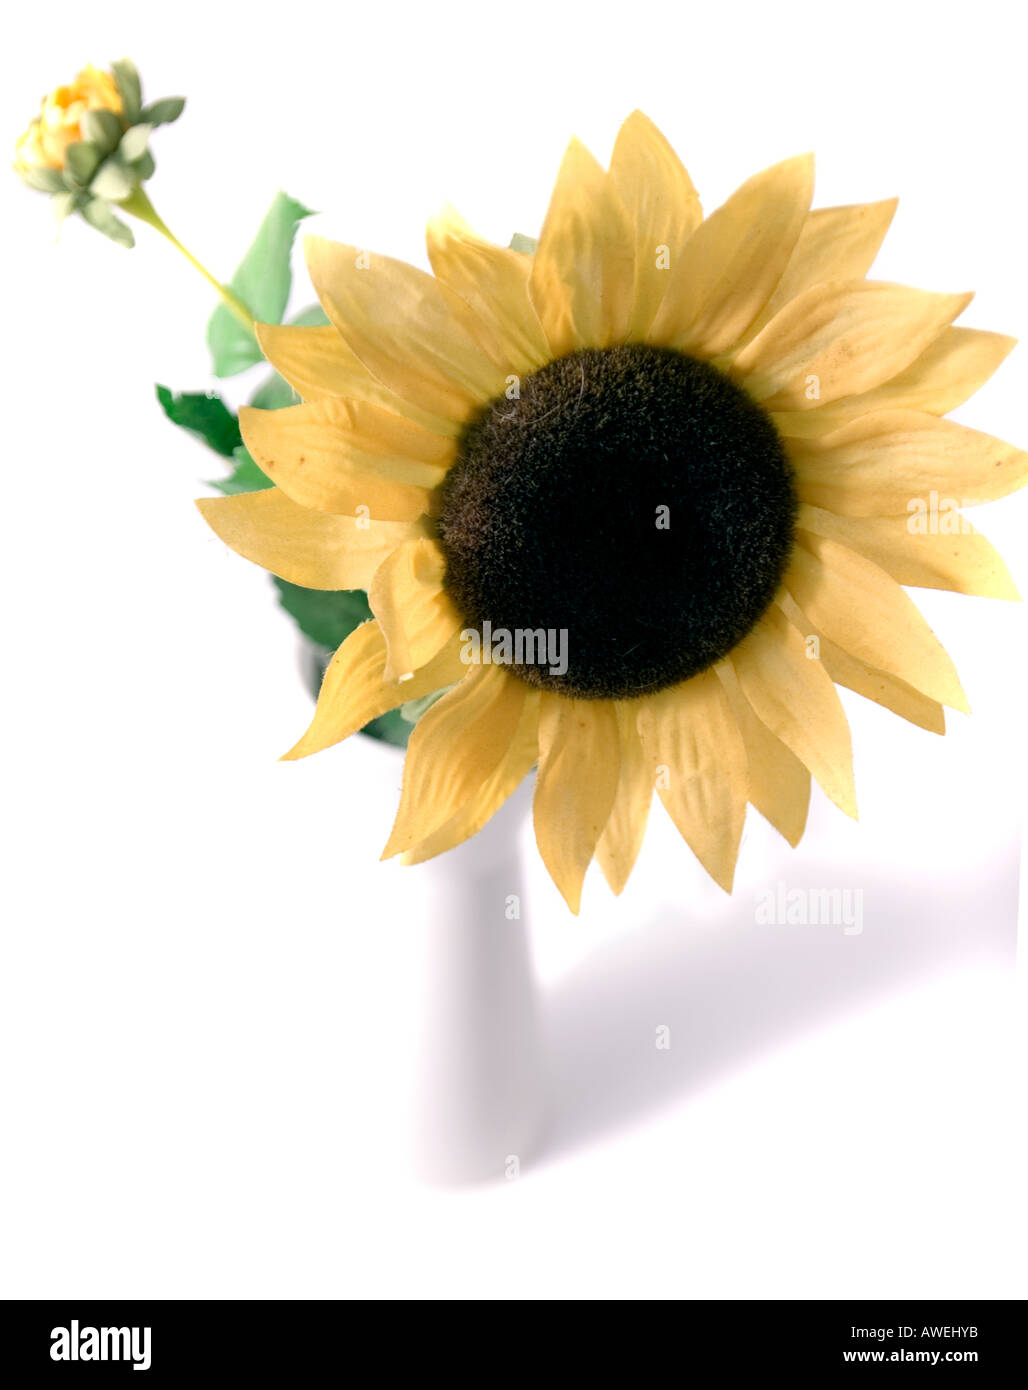 Close-up of a Sunflower Stock Photo